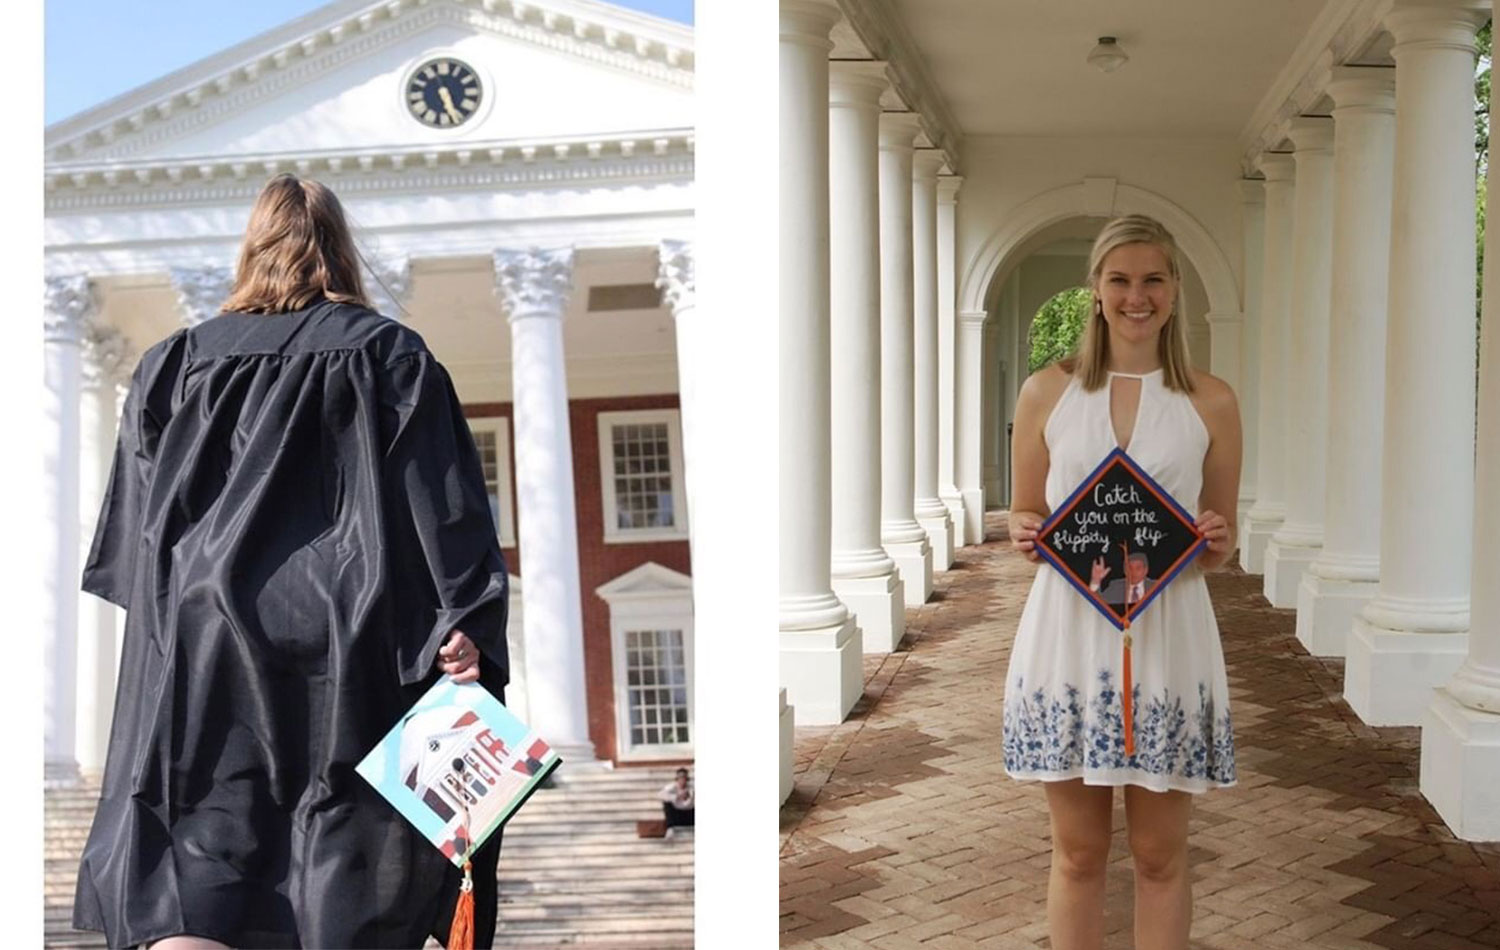 Left: Alex Greif facing the Rotunda and her hat with the Rotunda on it facing the camera  Right: Hannah Kohl holding her cap that paid tribute to her favorite TV show with the text Catch you on the flippity flop